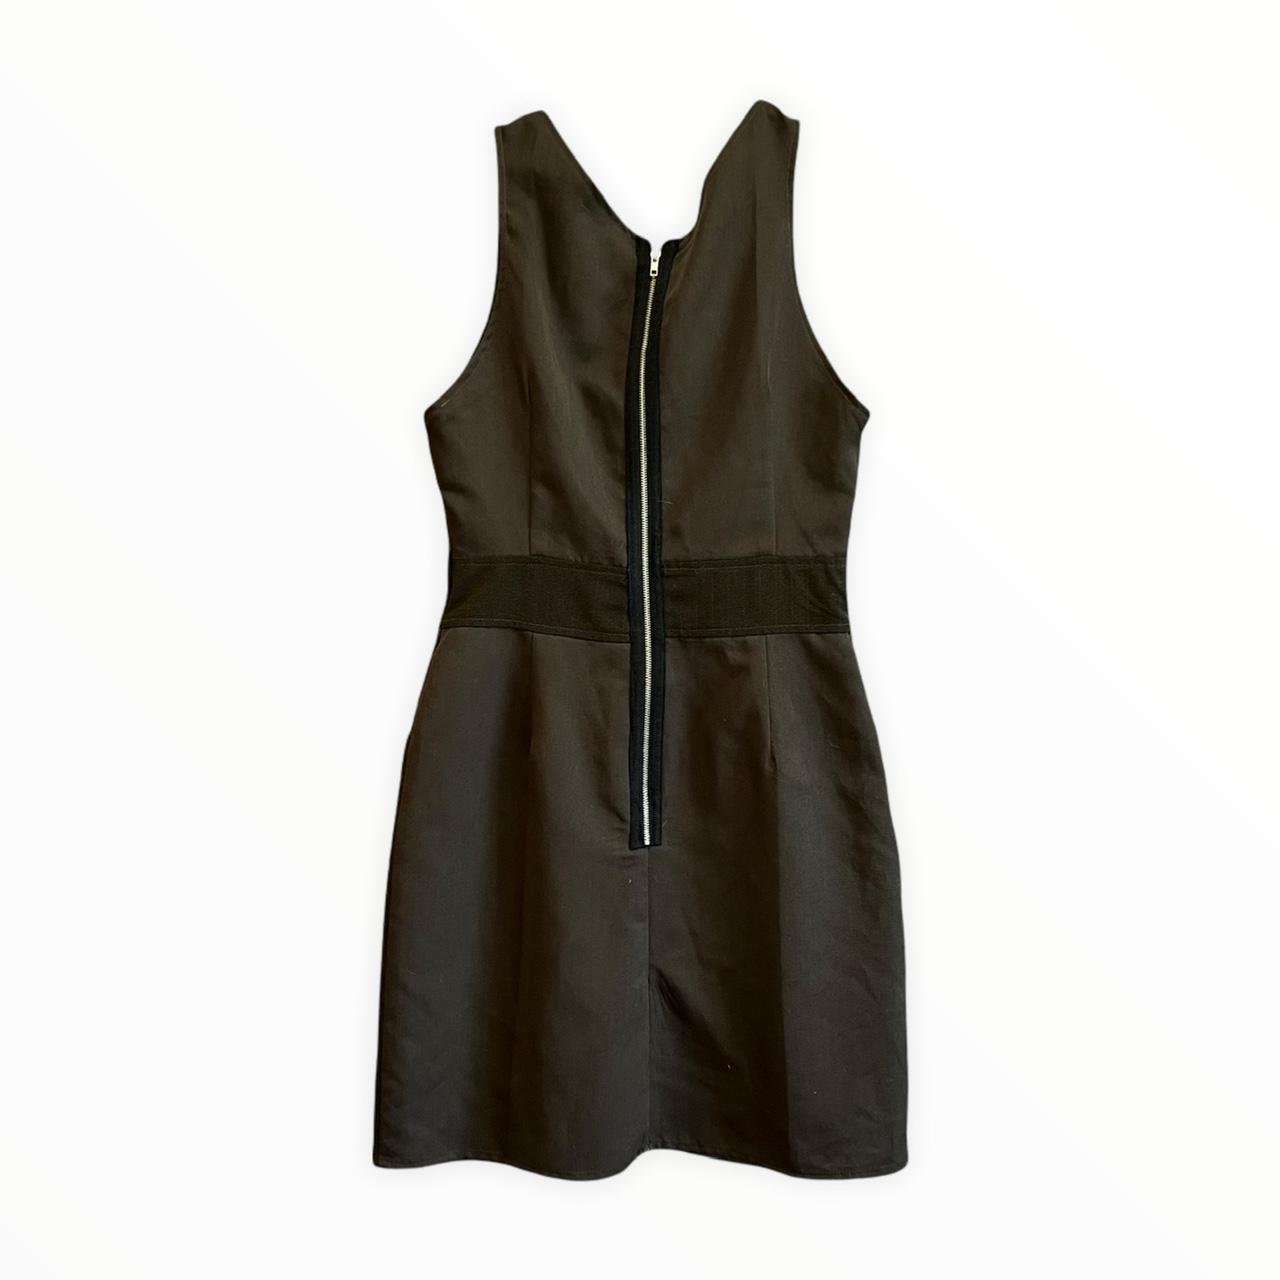 Urban Outfitters Women's Brown Dress (2)